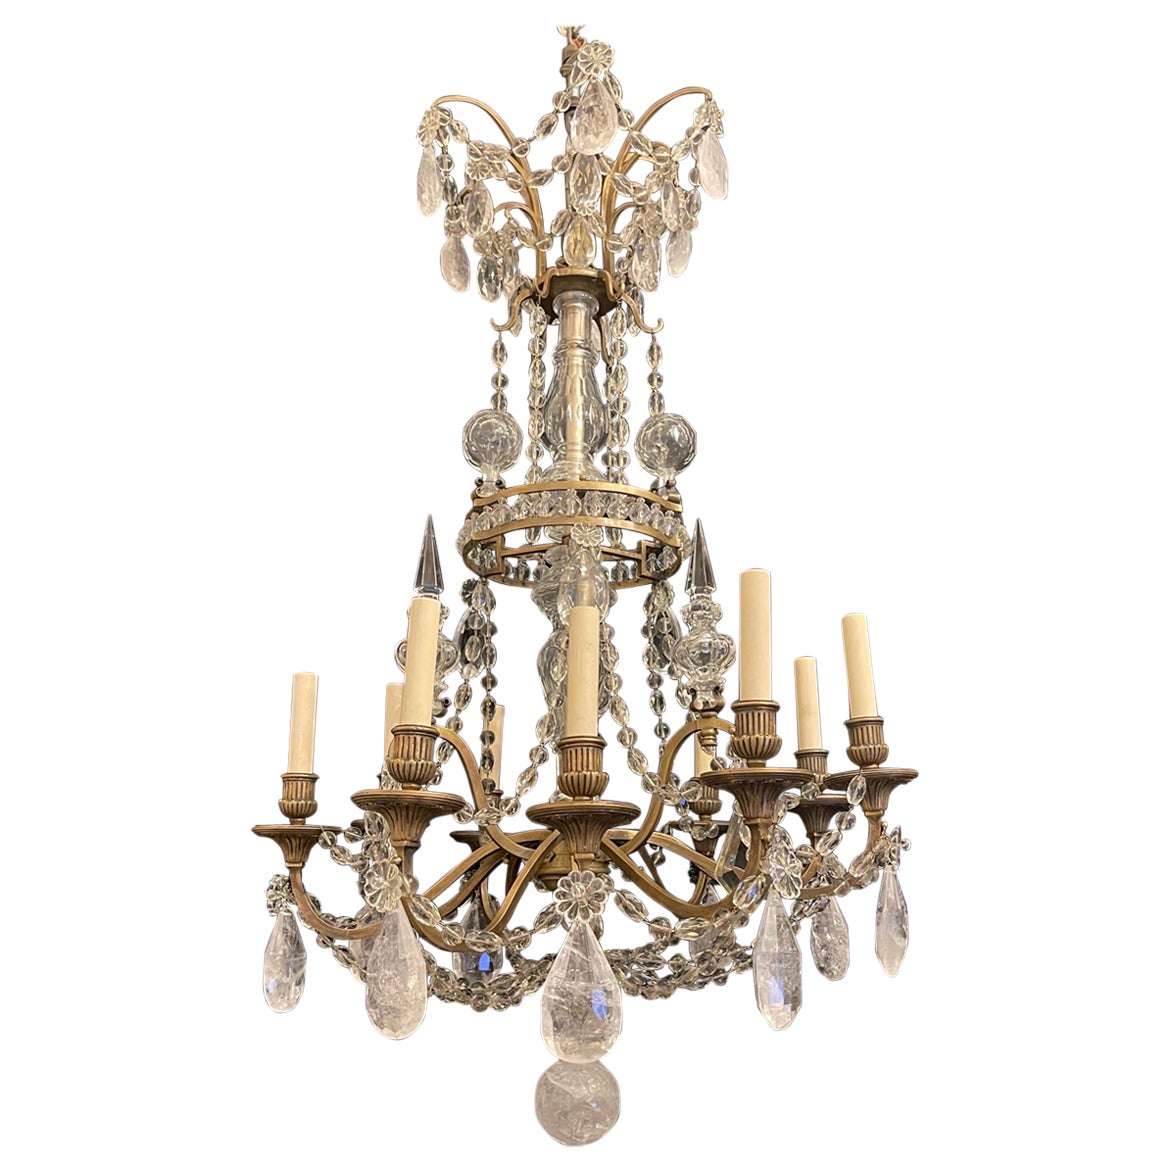 Magnificent Large French Dore Bronze Rock Crystal Louis XVI 9 Light Chandelier